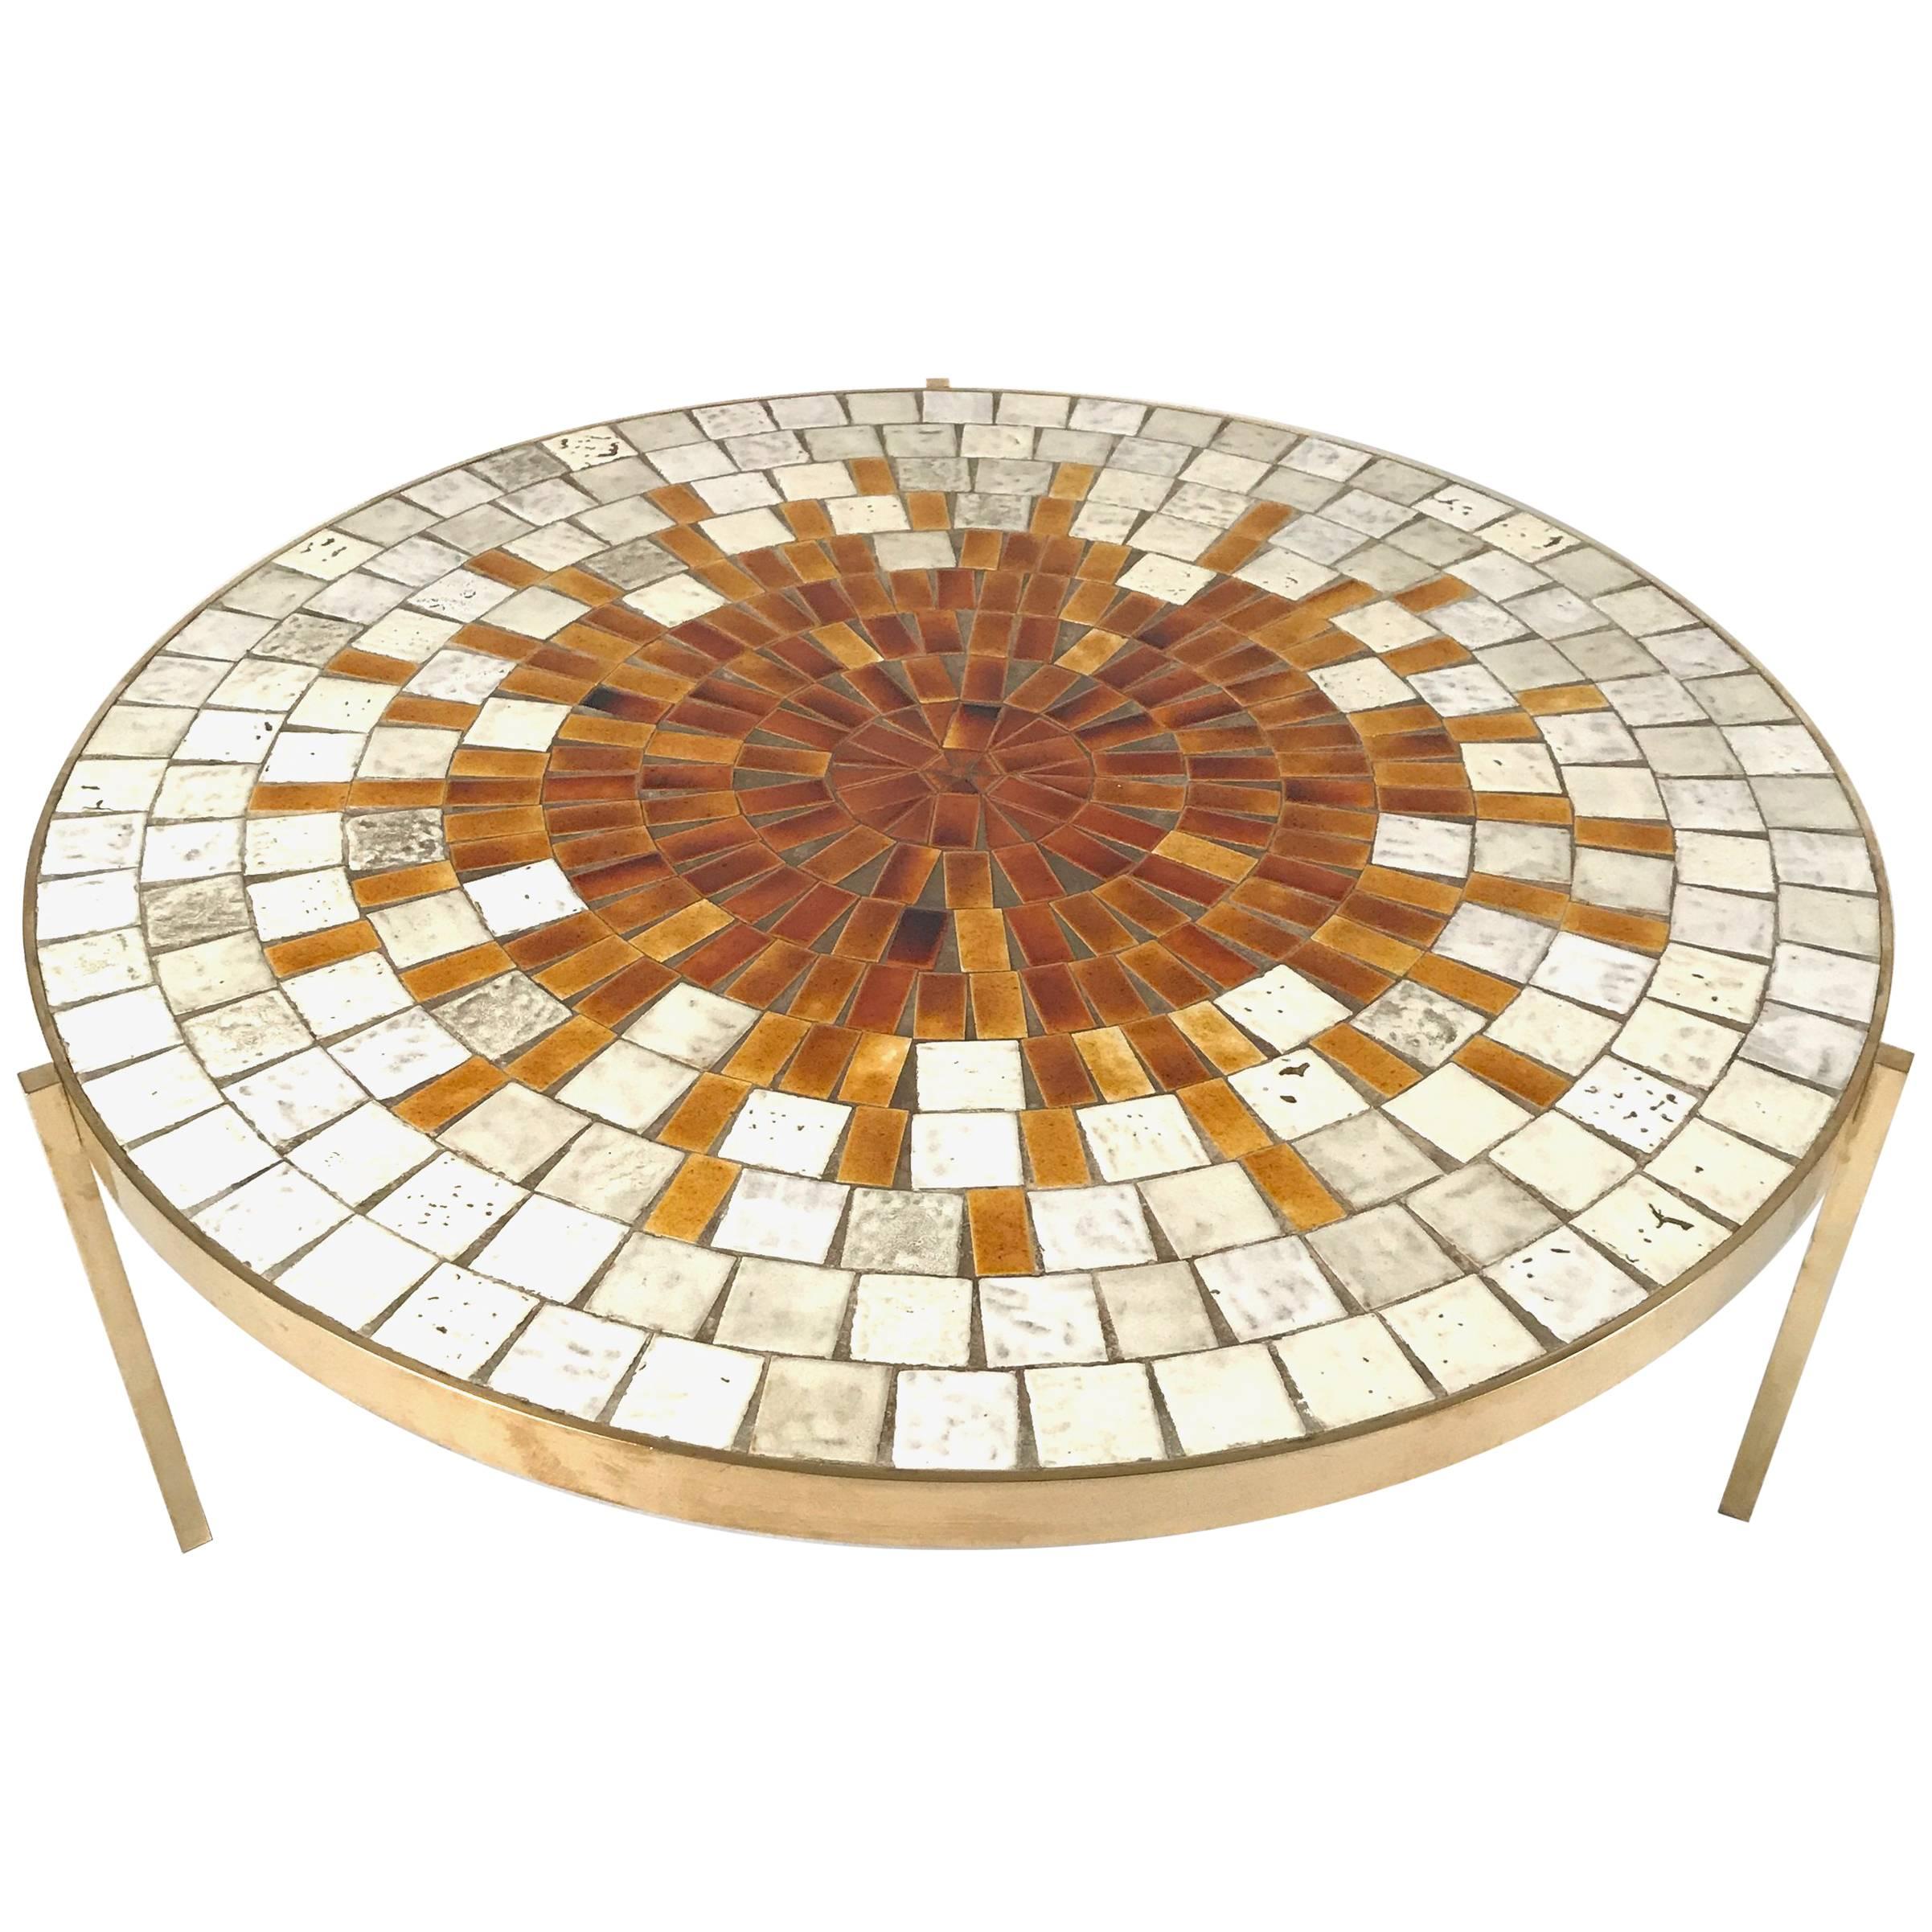 Rare Mosaic Top Table with Solid Brass Three-Legged Stilt Base by Mosaic House